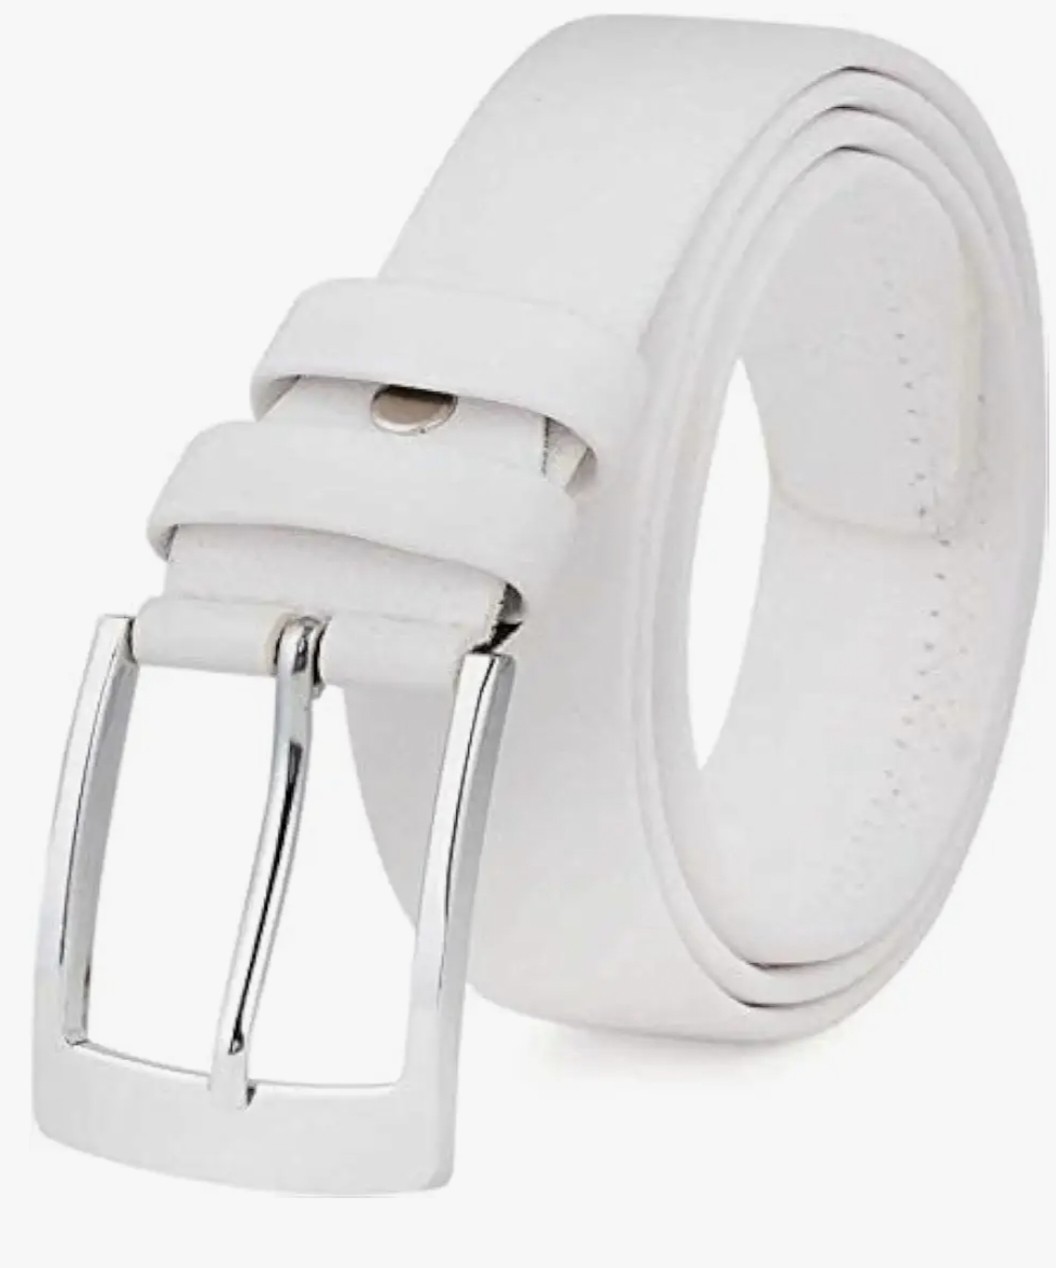 Imoa Traders- Men's hip white belt fits upto hip size of 36 inches pack of 1